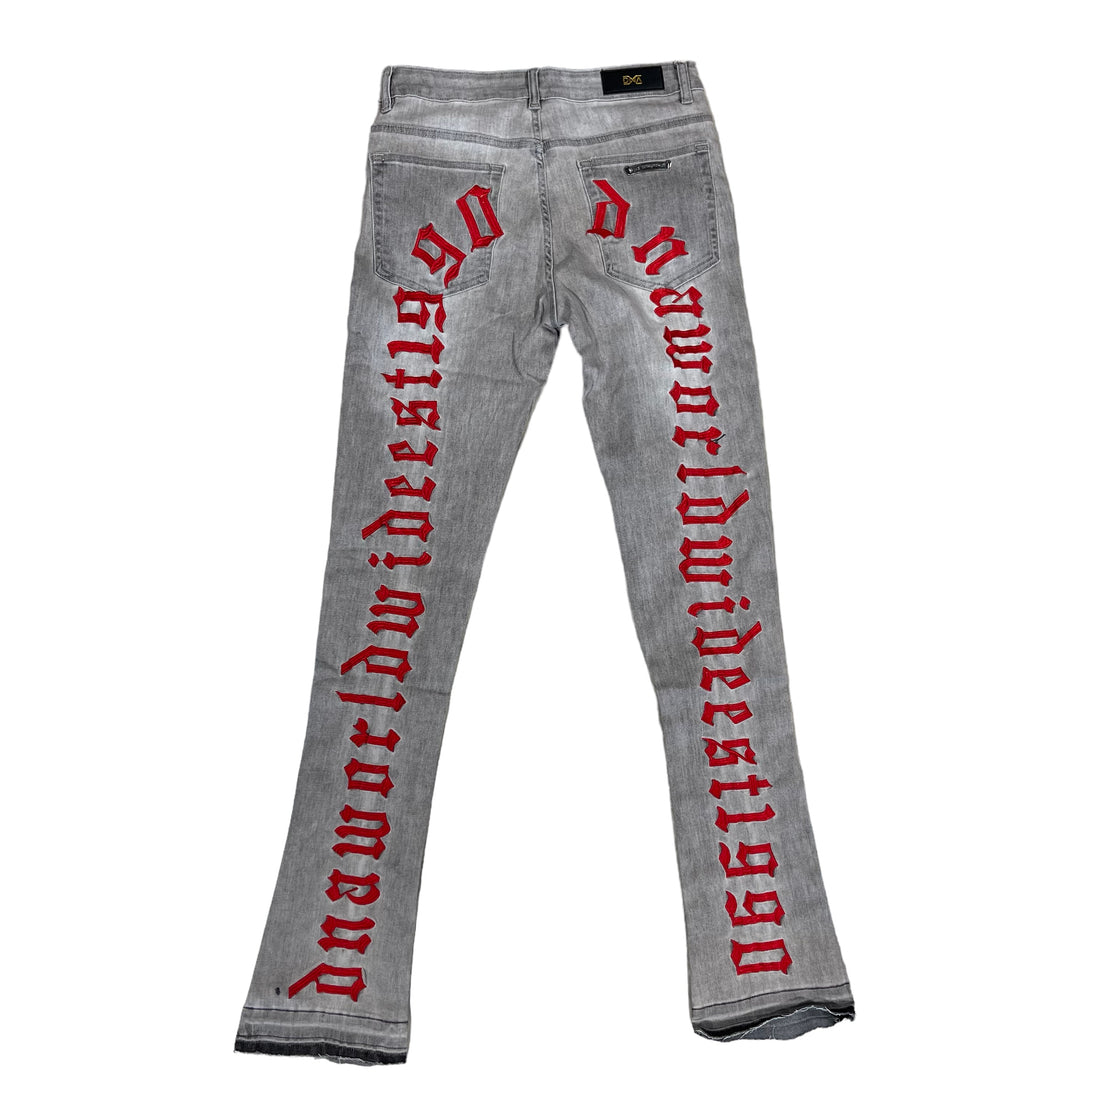 DNA Worldwide Jeans Grey/Red